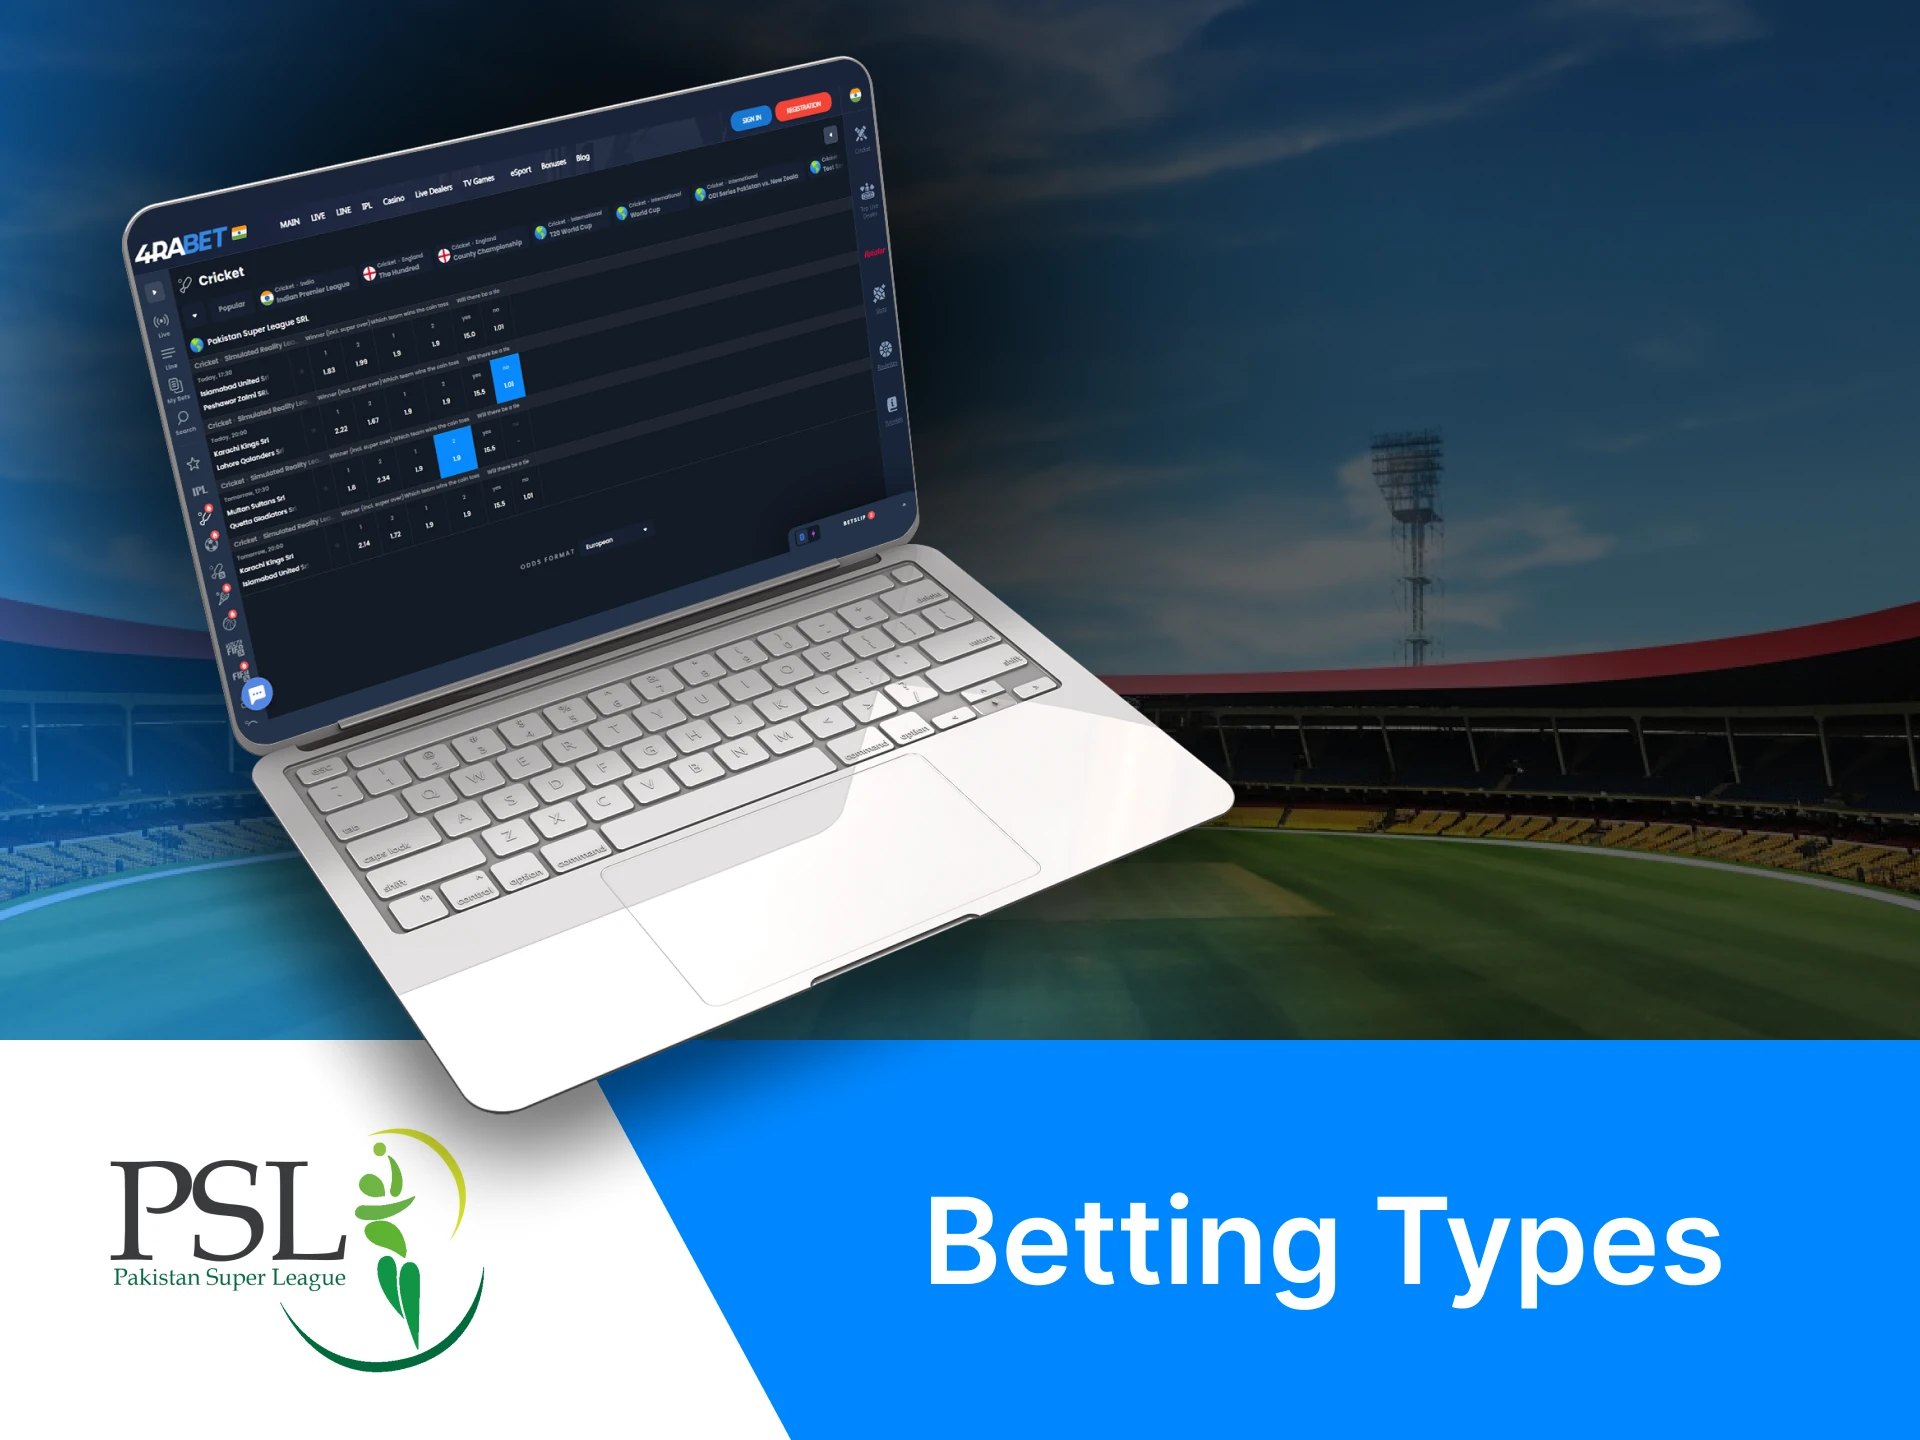 On the betting sites, you can combine different types of bets for PSL.